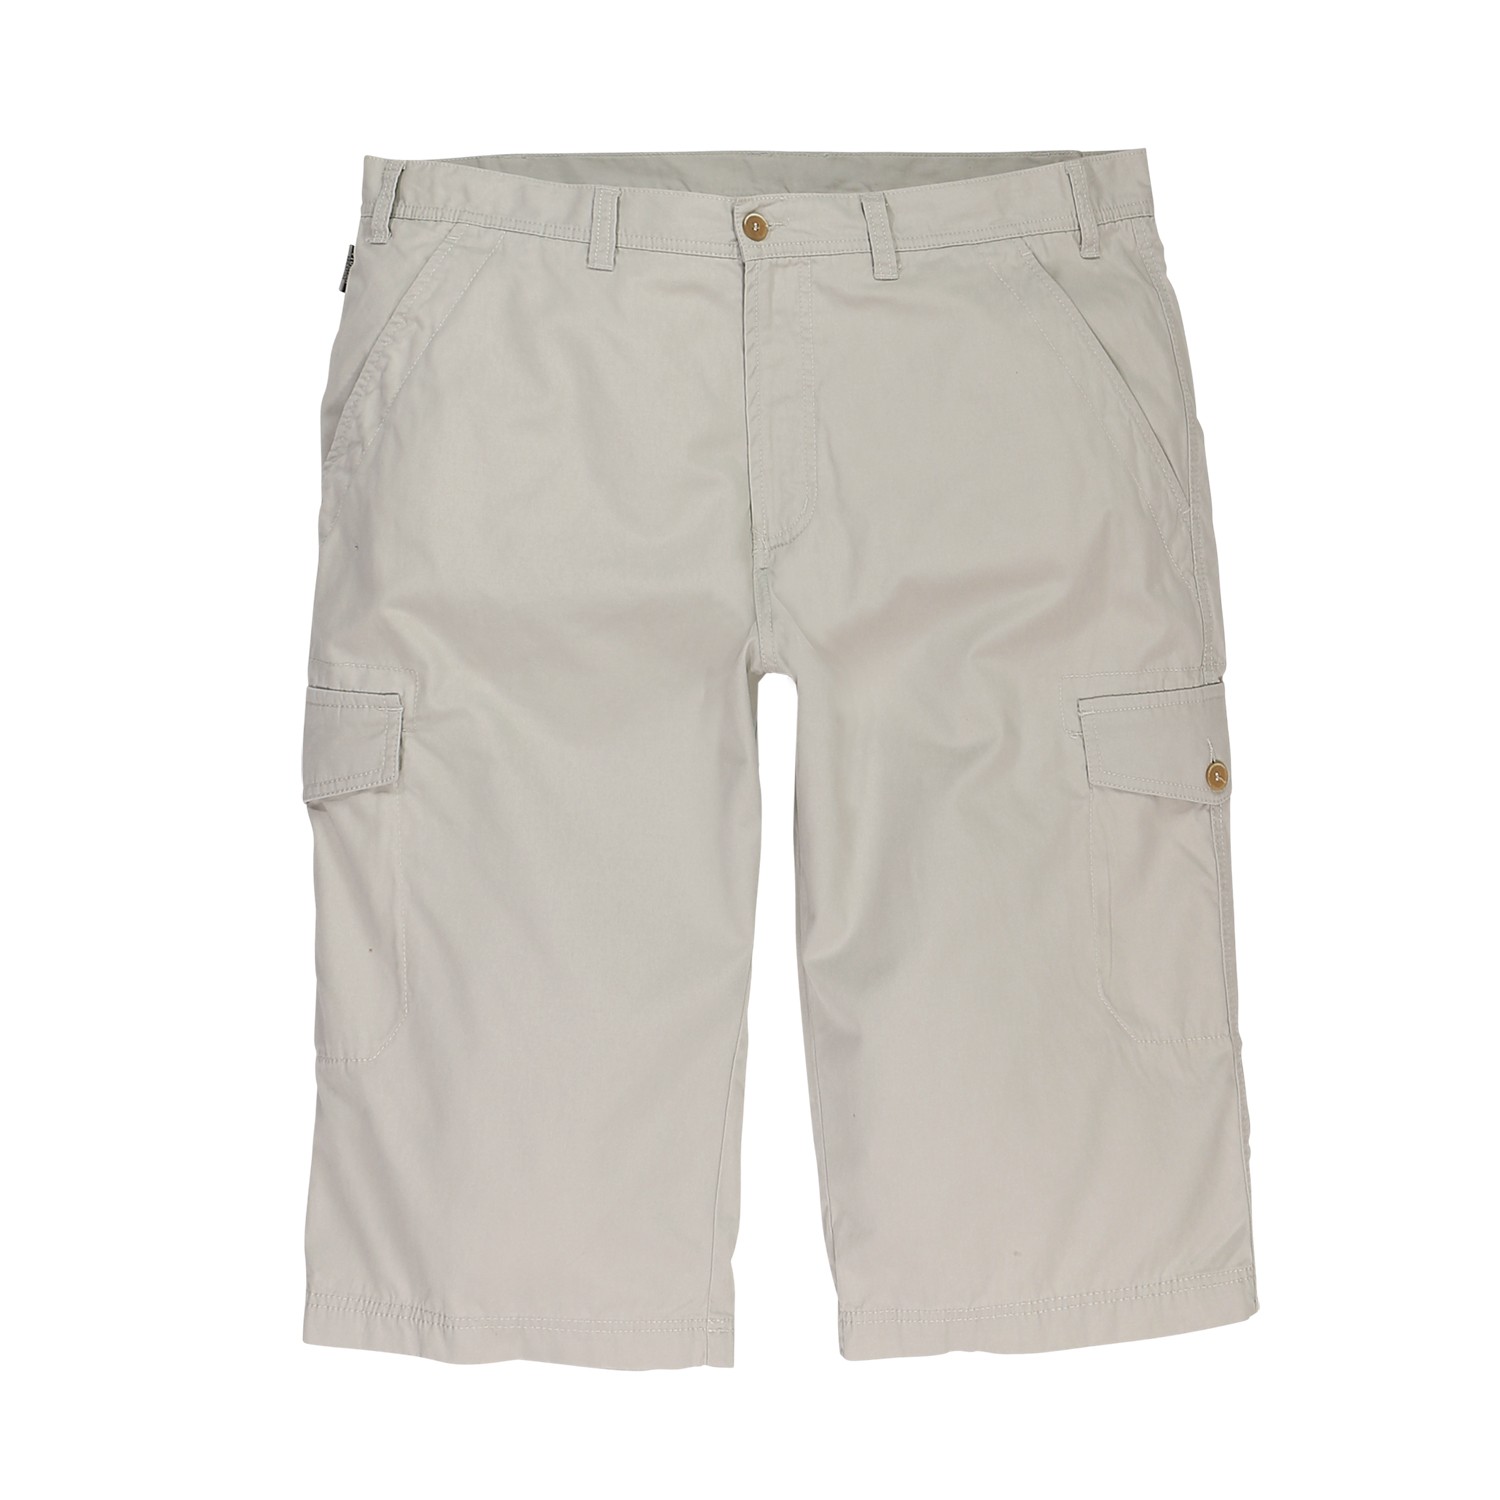 XXL Shorts by Pionier | beige in large sizes available